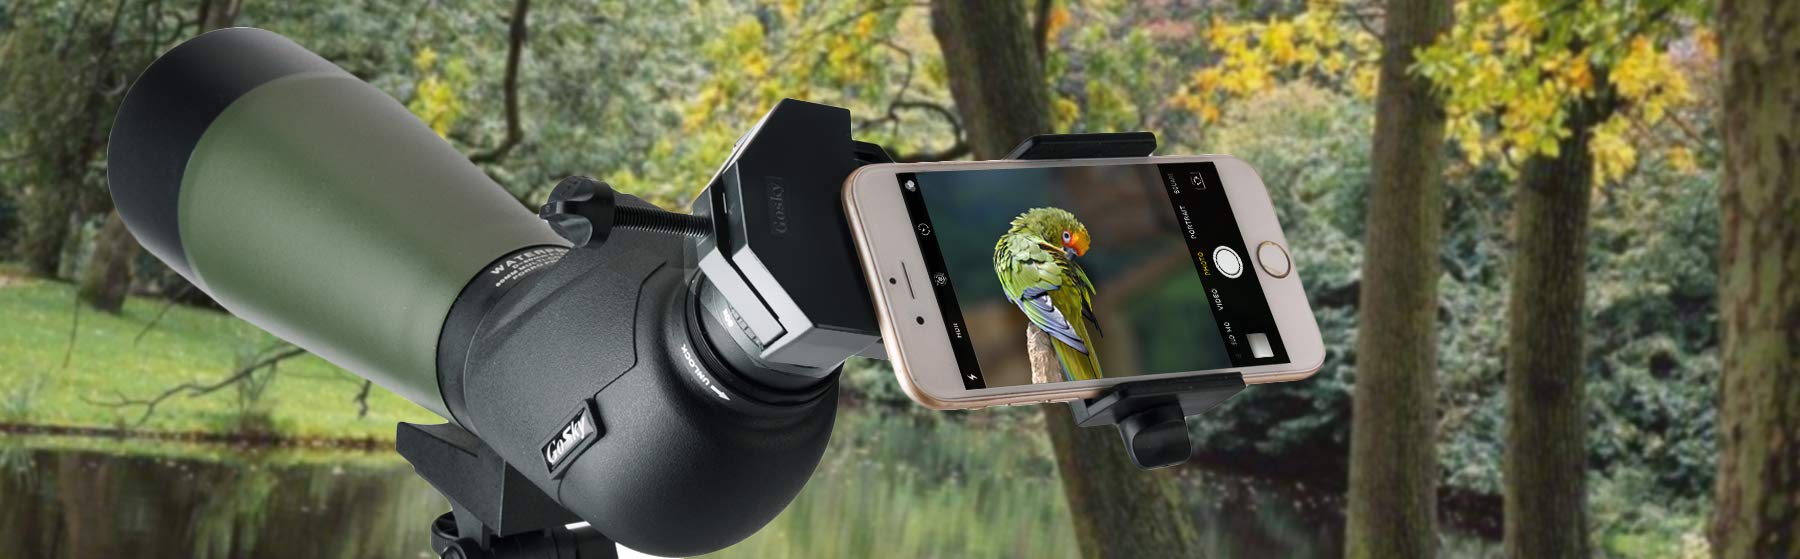 GOSKY Smartphone Adapter Mount Regular Size - Compatible with Binoculars, Monoculars, Spotting Scopes, Telescope, Microscopes - Fits almost all Smartphones on the Market - Record Nature and The World